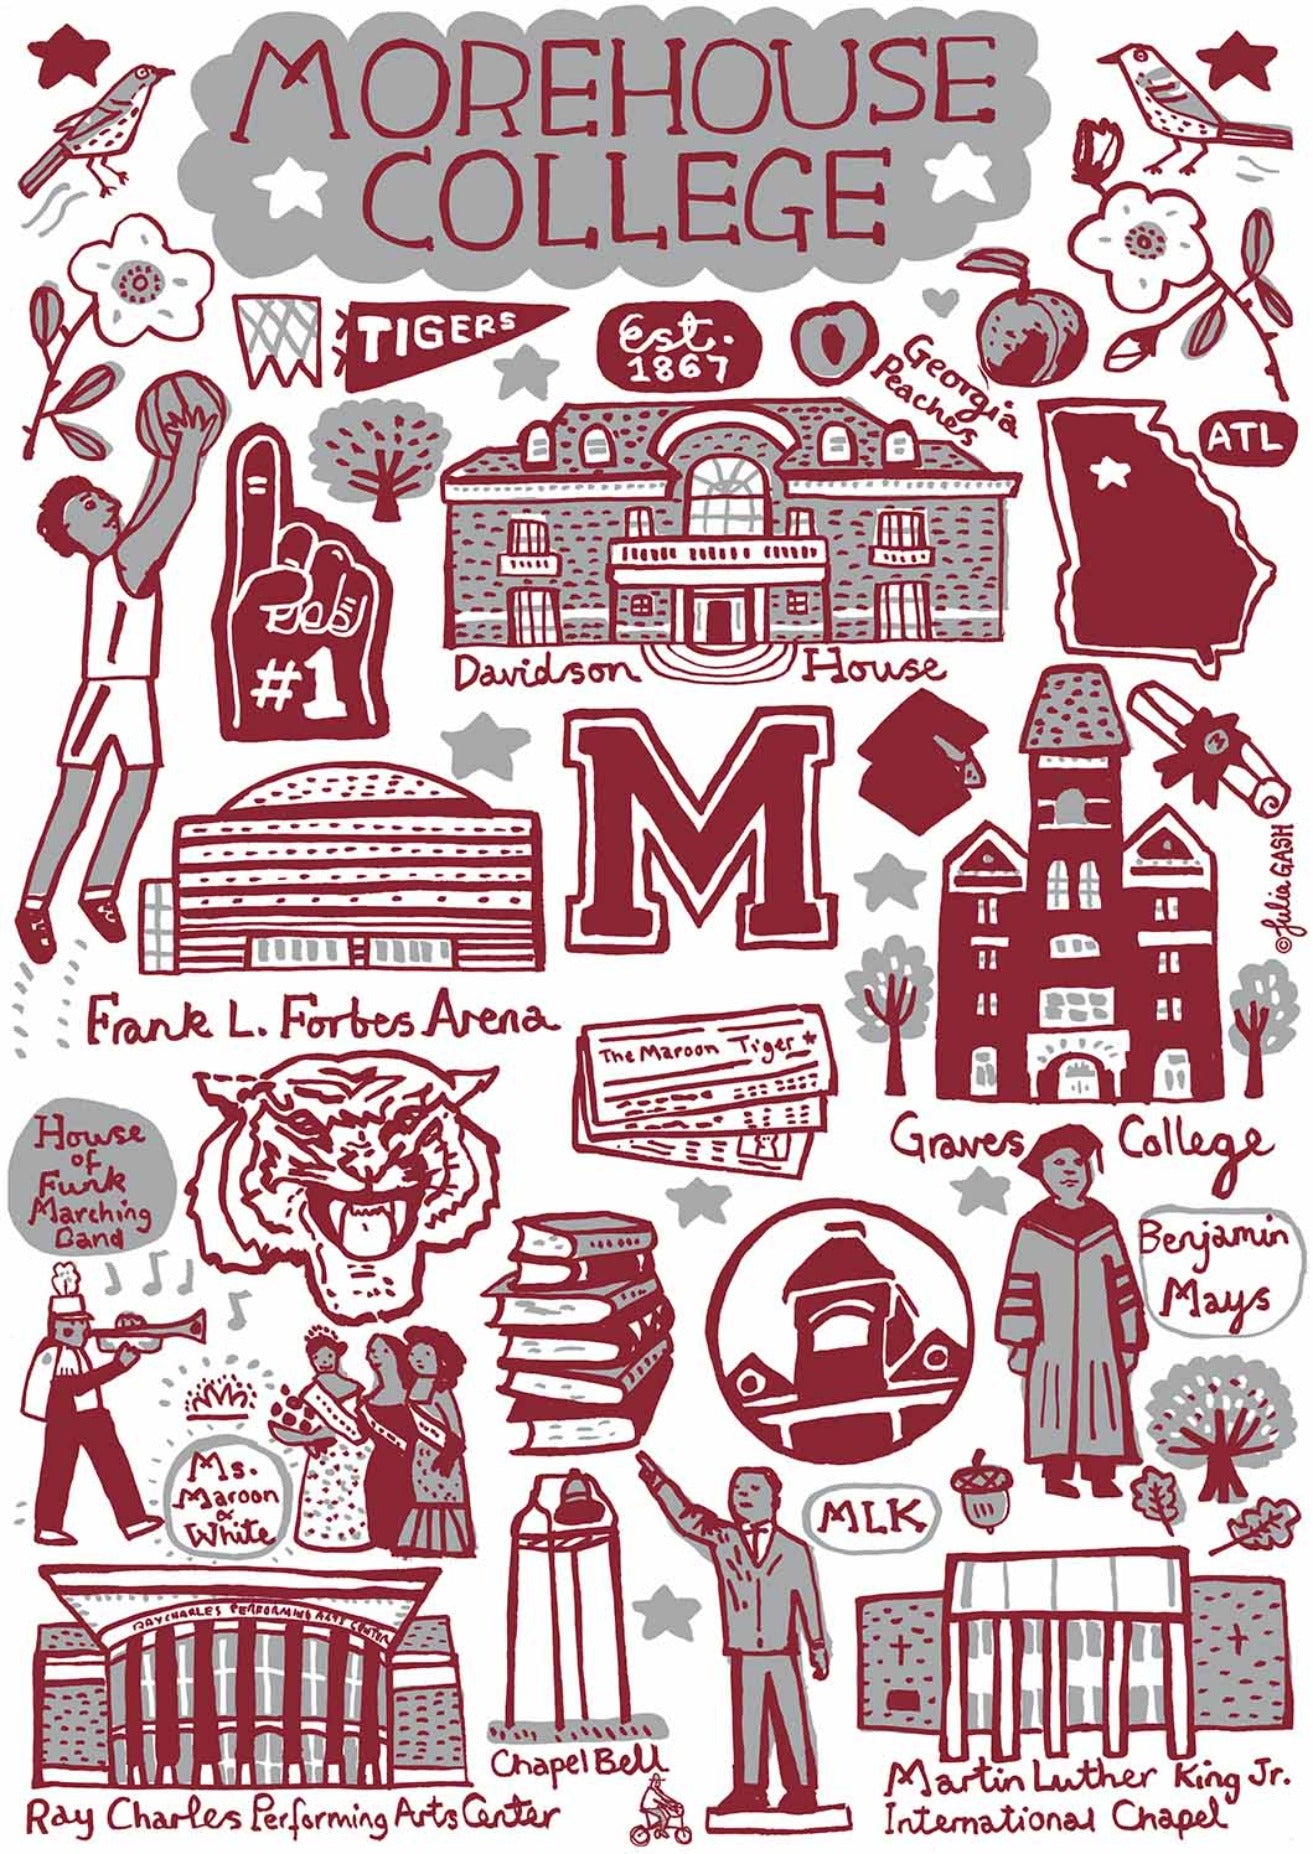 Morehouse College by Julia Gash